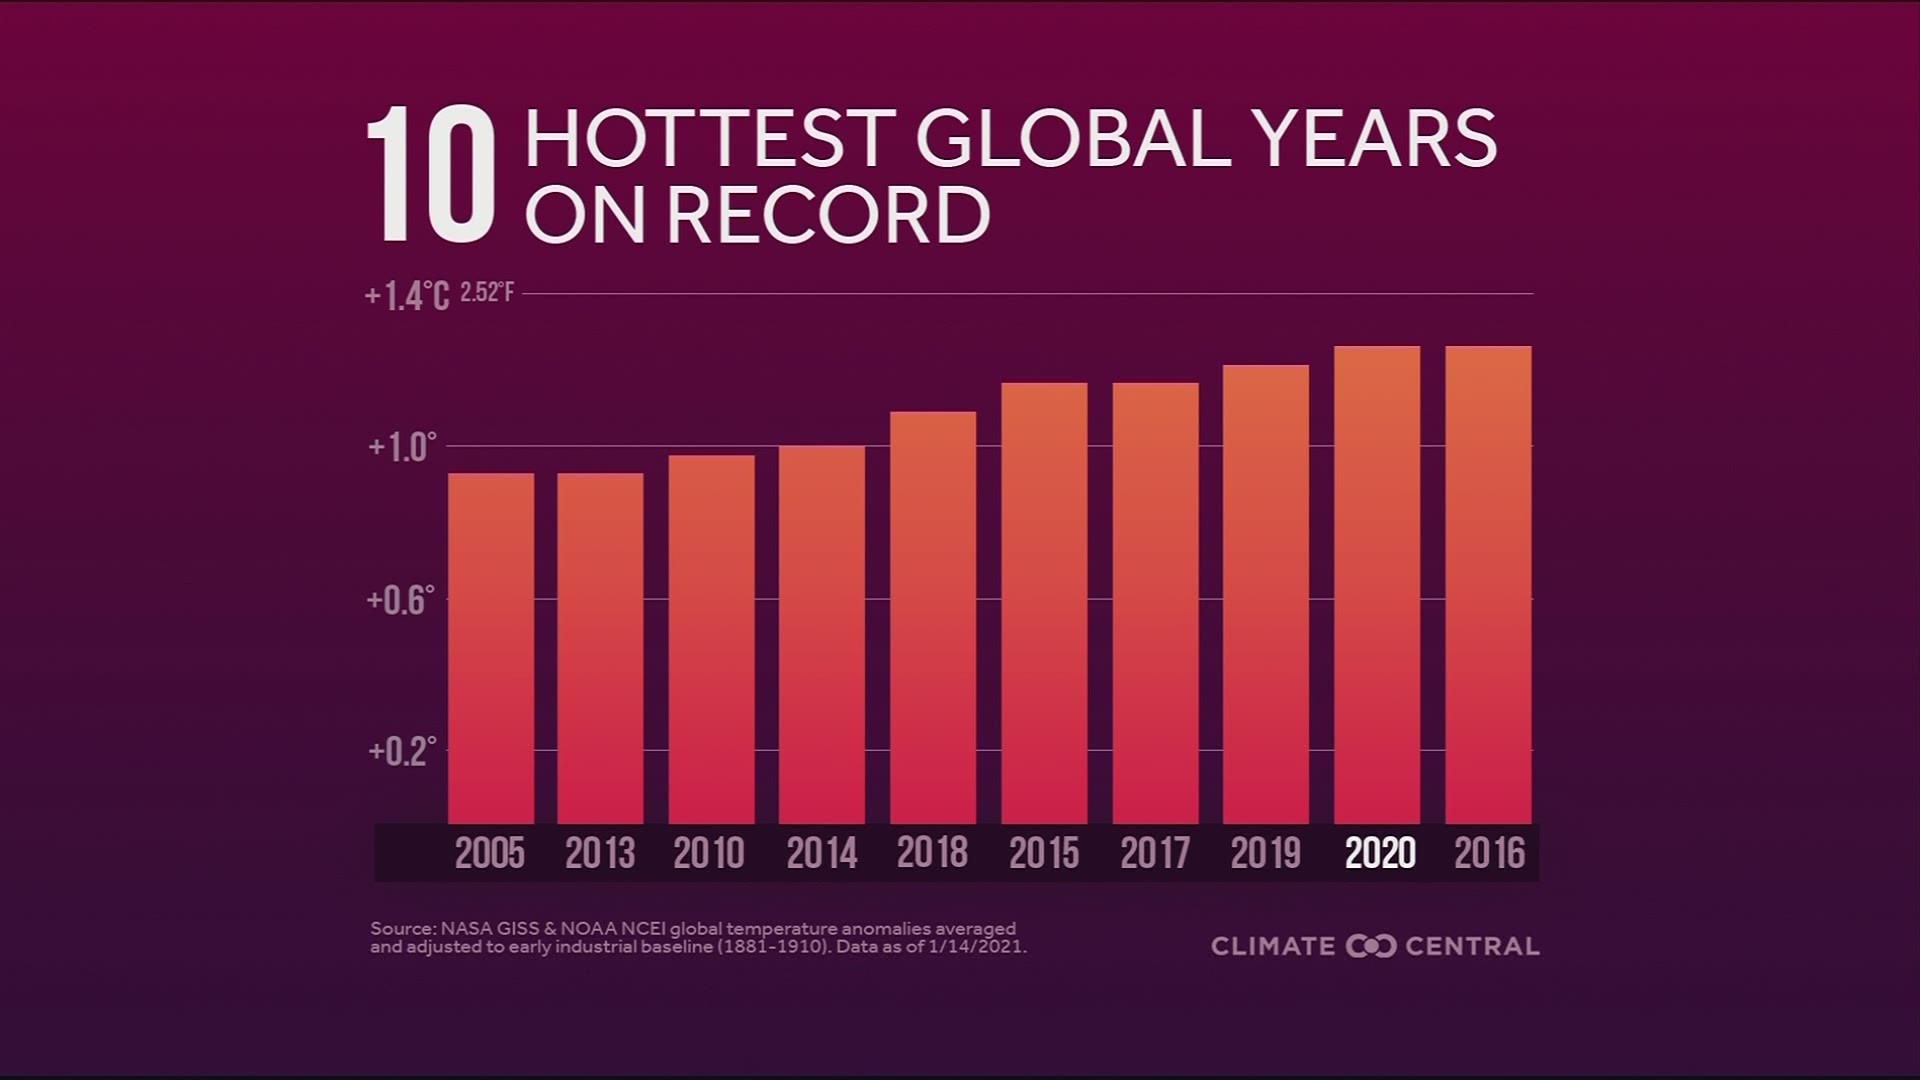 2020 is behind 2016 as the hottest yeard on record for Earth.